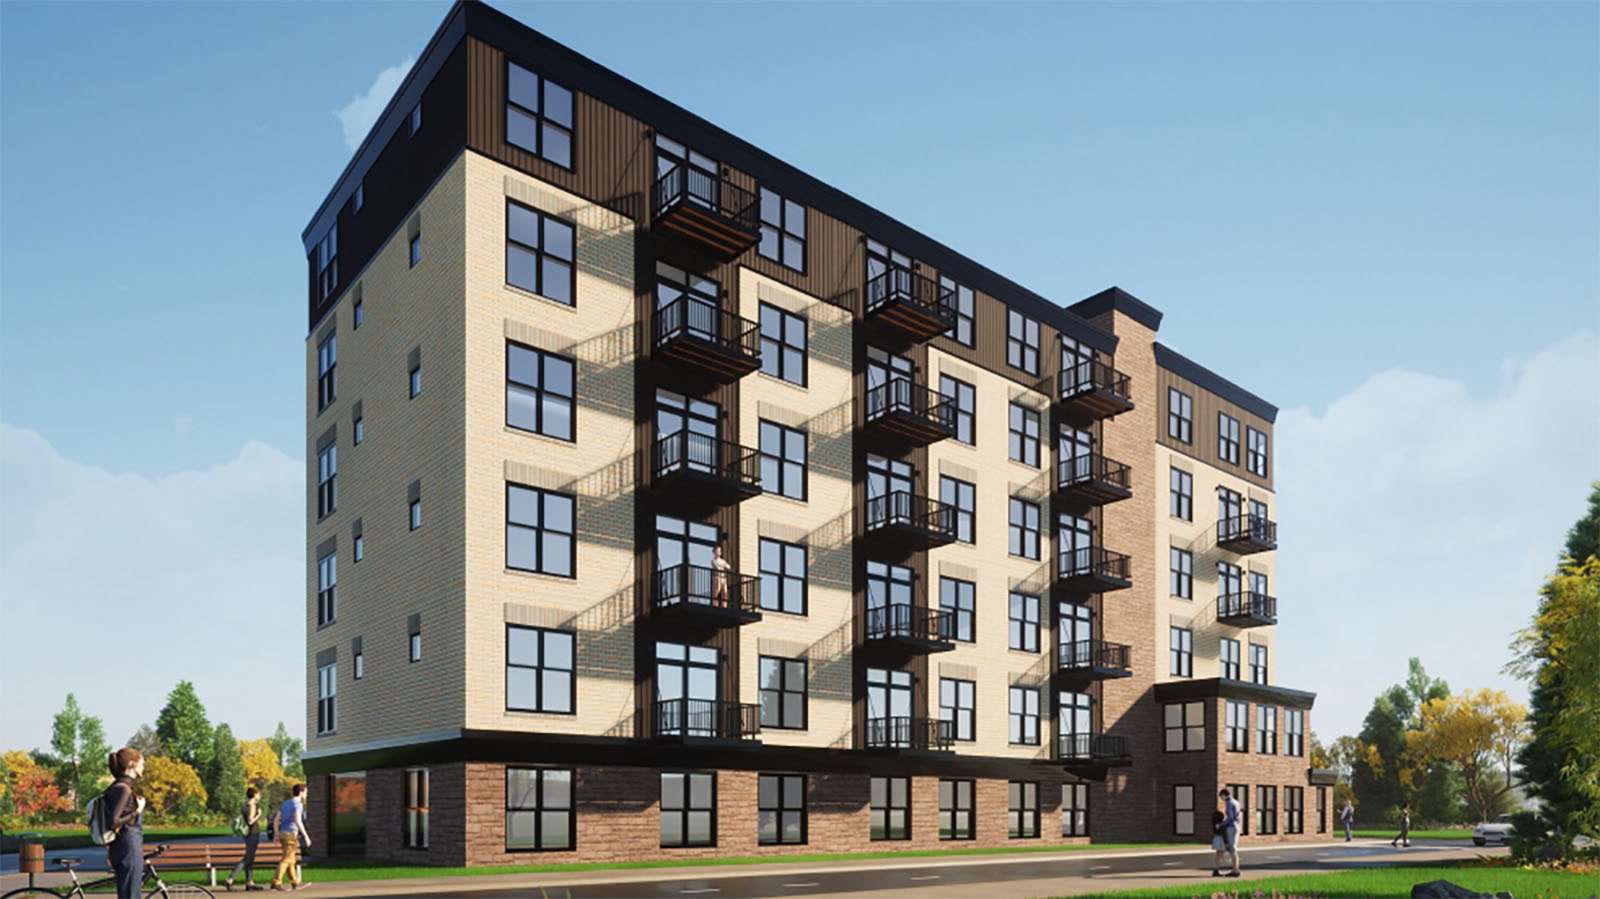 The Stencil Group, a Sioux Falls, South Dakota-based contractor, is proposing a five-story, 88-unit apartment building in downtown Laramie. This is a rough draft image of the project; the final design will likely be changed to better fit the historic downtown aesthetic.